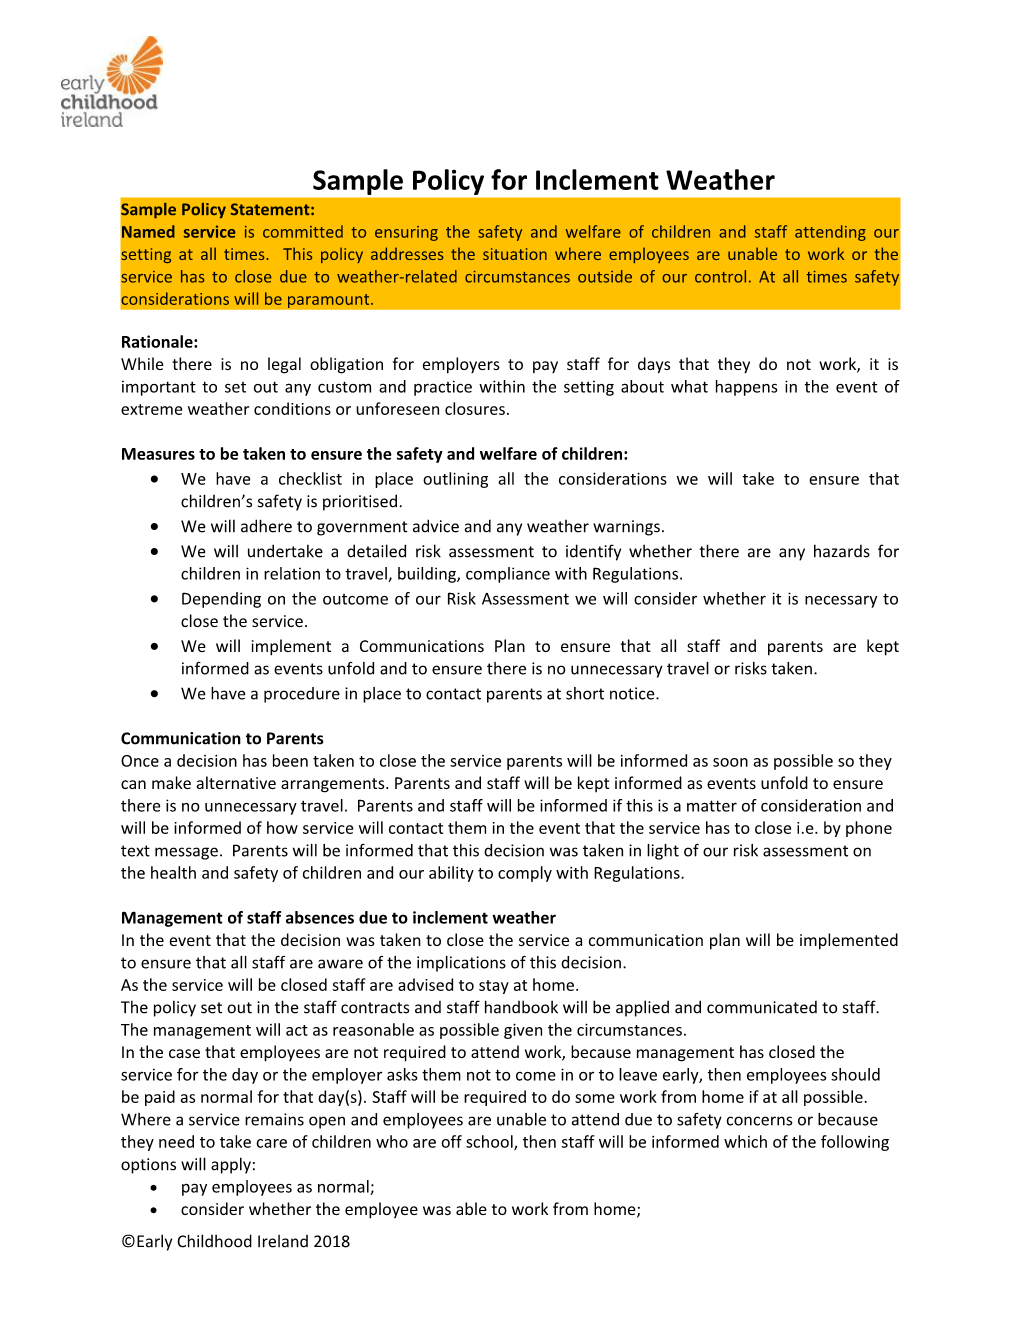 Sample Policy for Inclement Weather